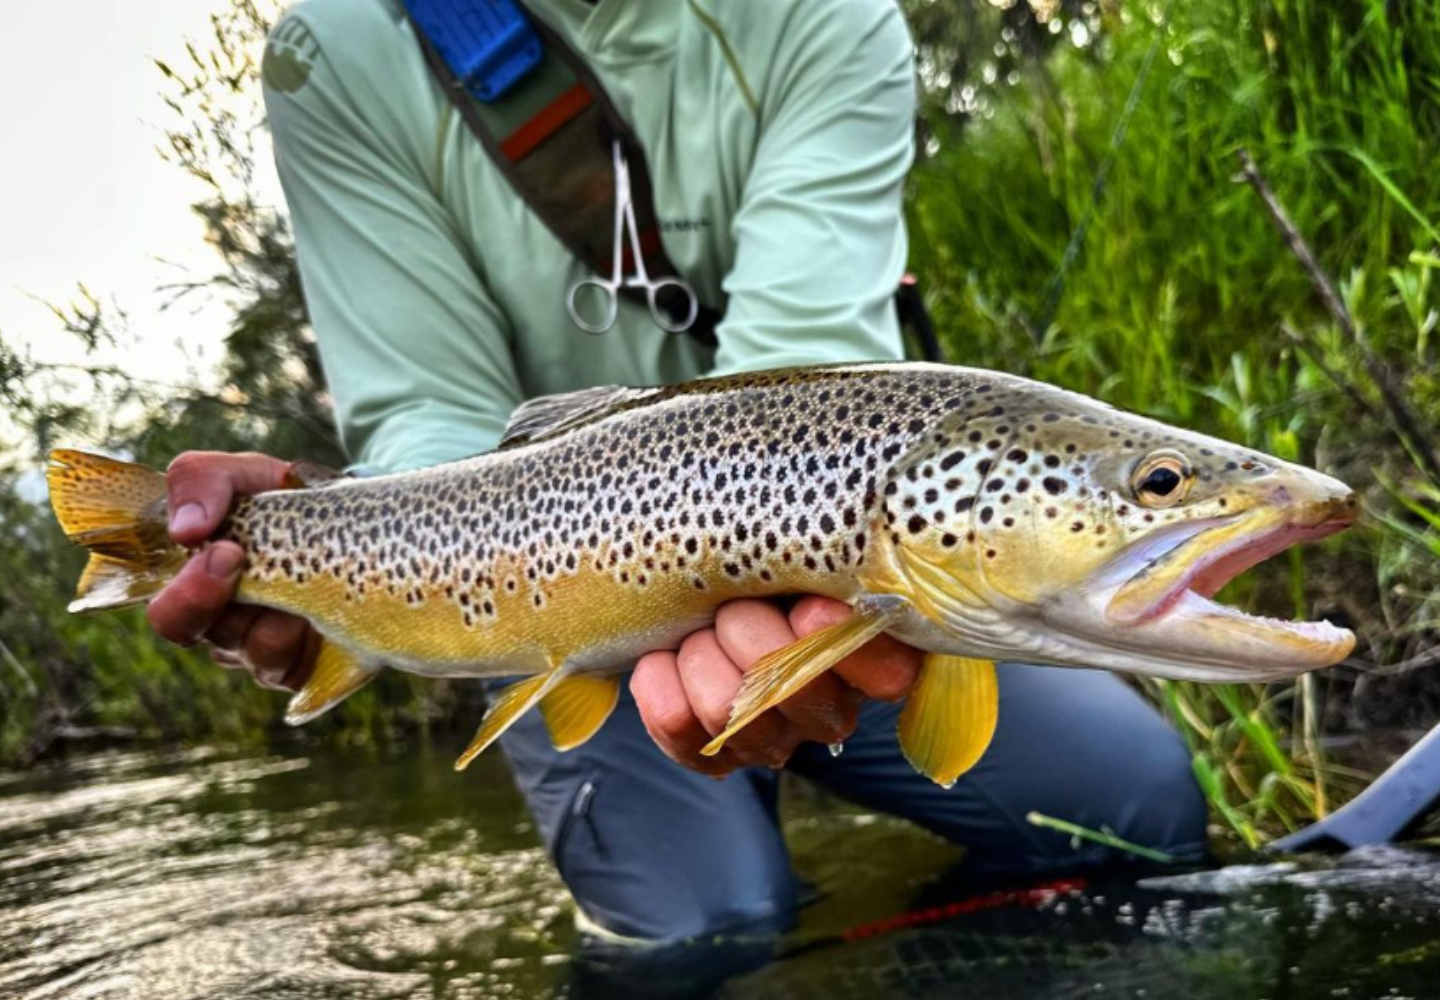 angler holds large brown trout with grassy bank in background